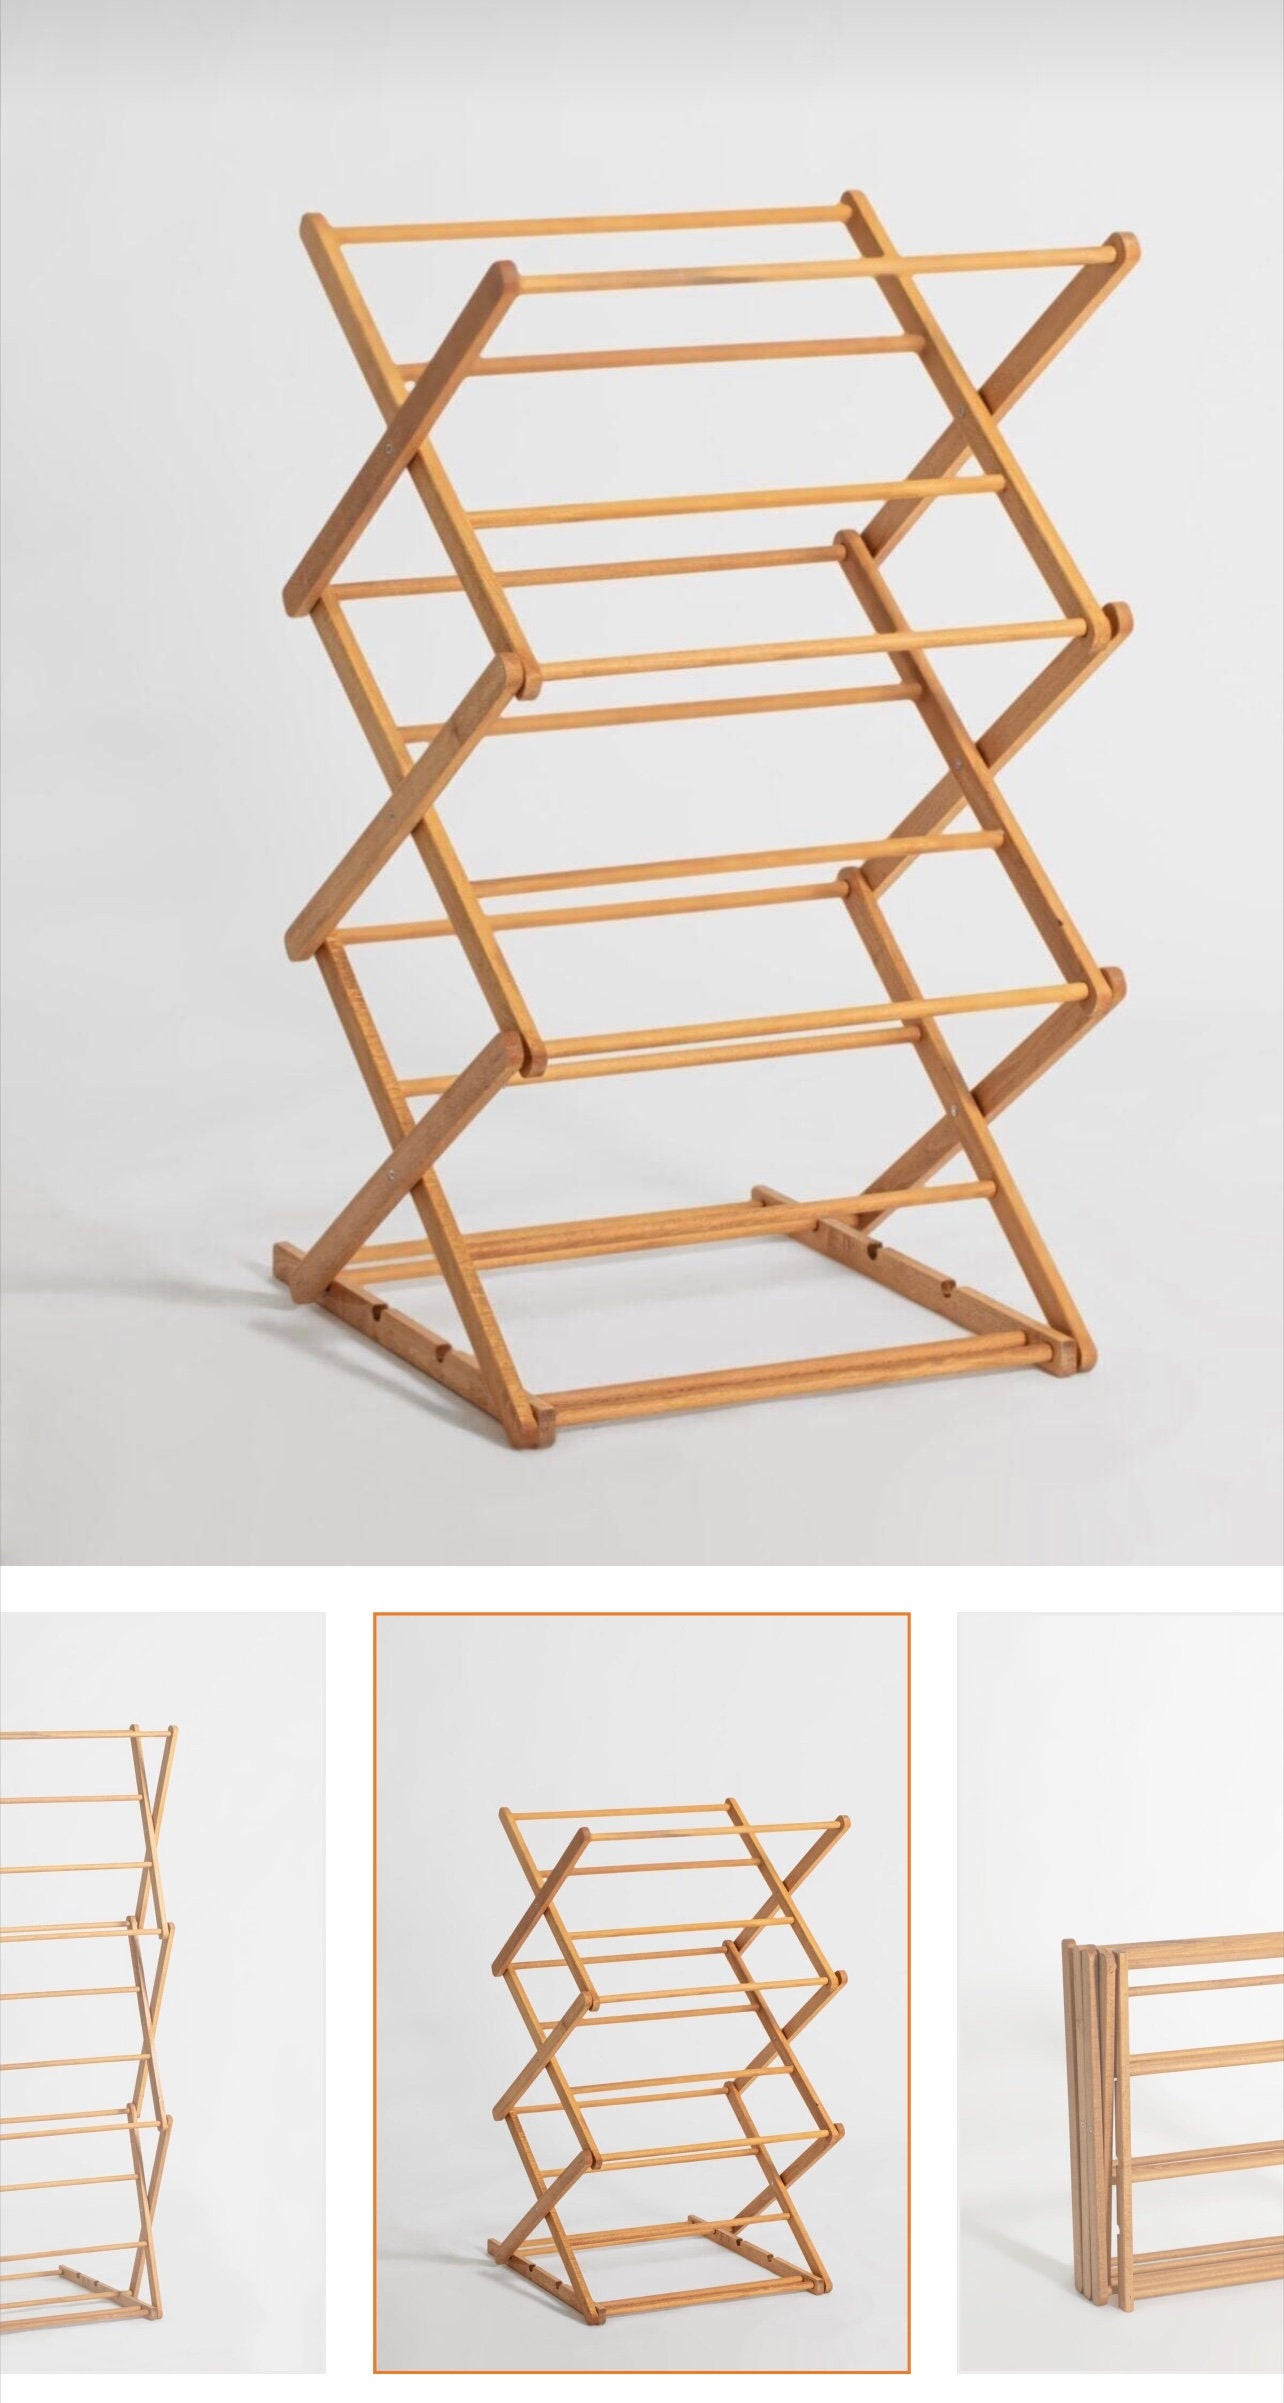 Wooden Foldable Clothes Airer, Clothes Drying Rack. Puidust